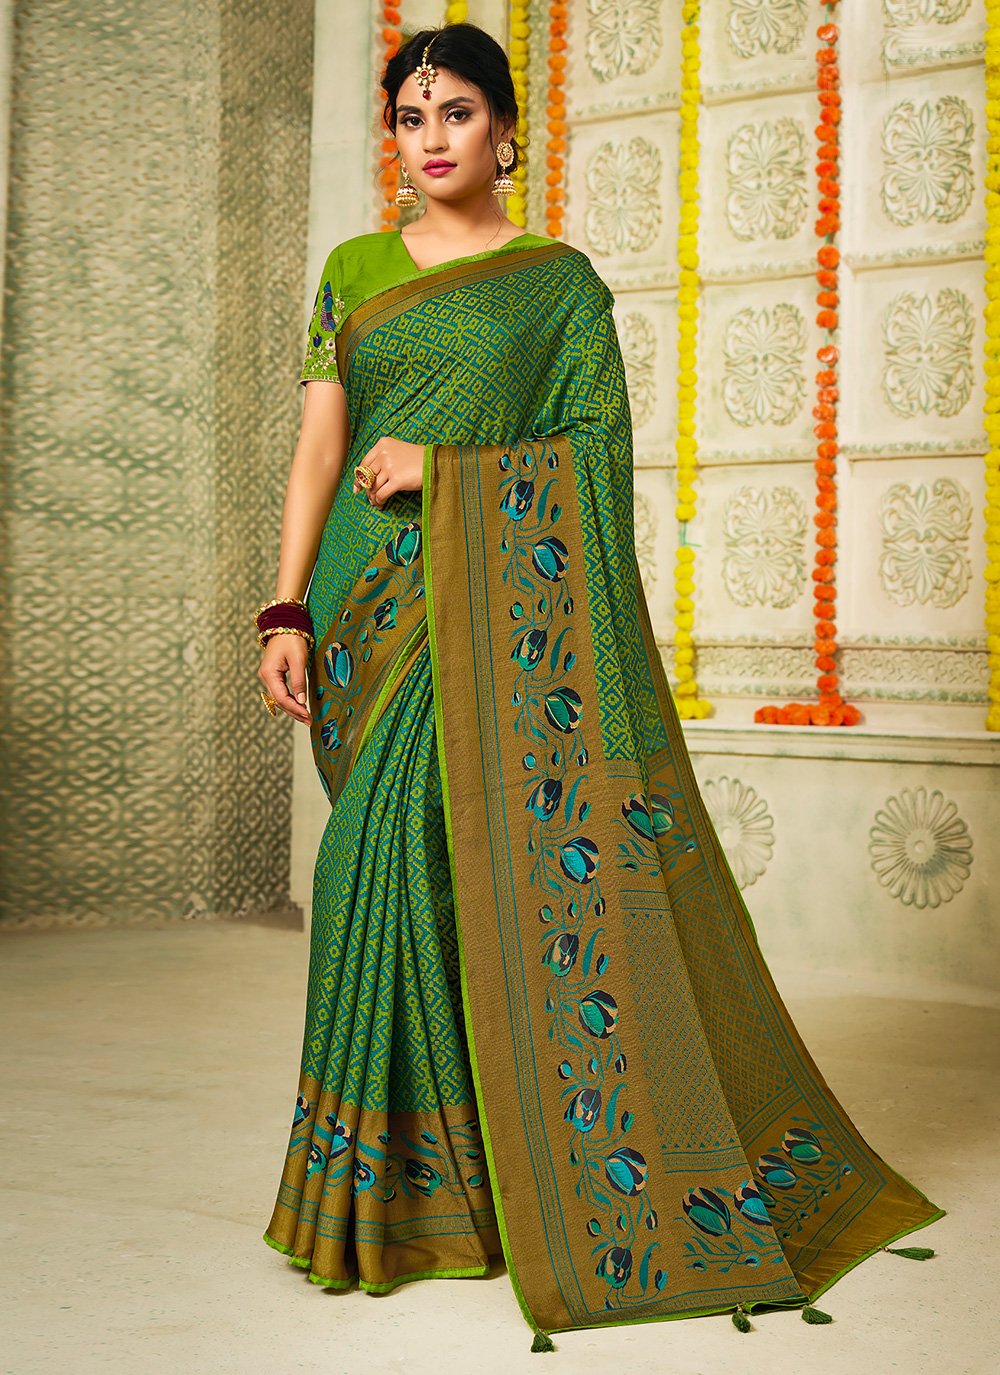 Remarkable Green Brasso Embroidered Traditional Saree for Festival